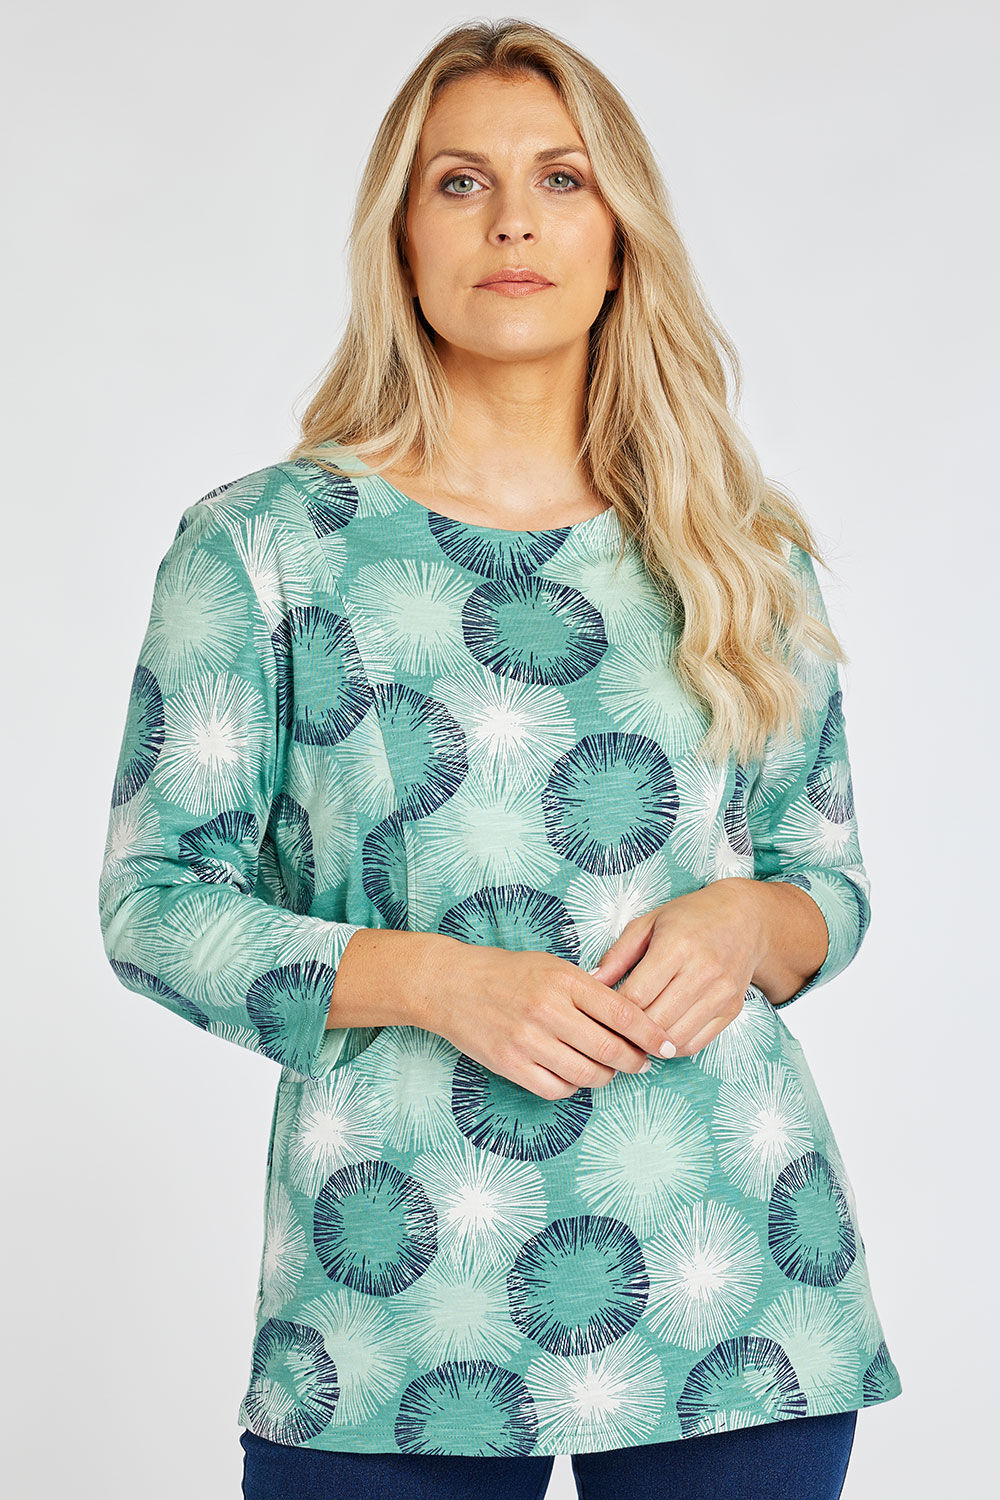 Bonmarche Green 3/4 Sleeve Spot Design Tunic With Pocket Detail, Size: 10